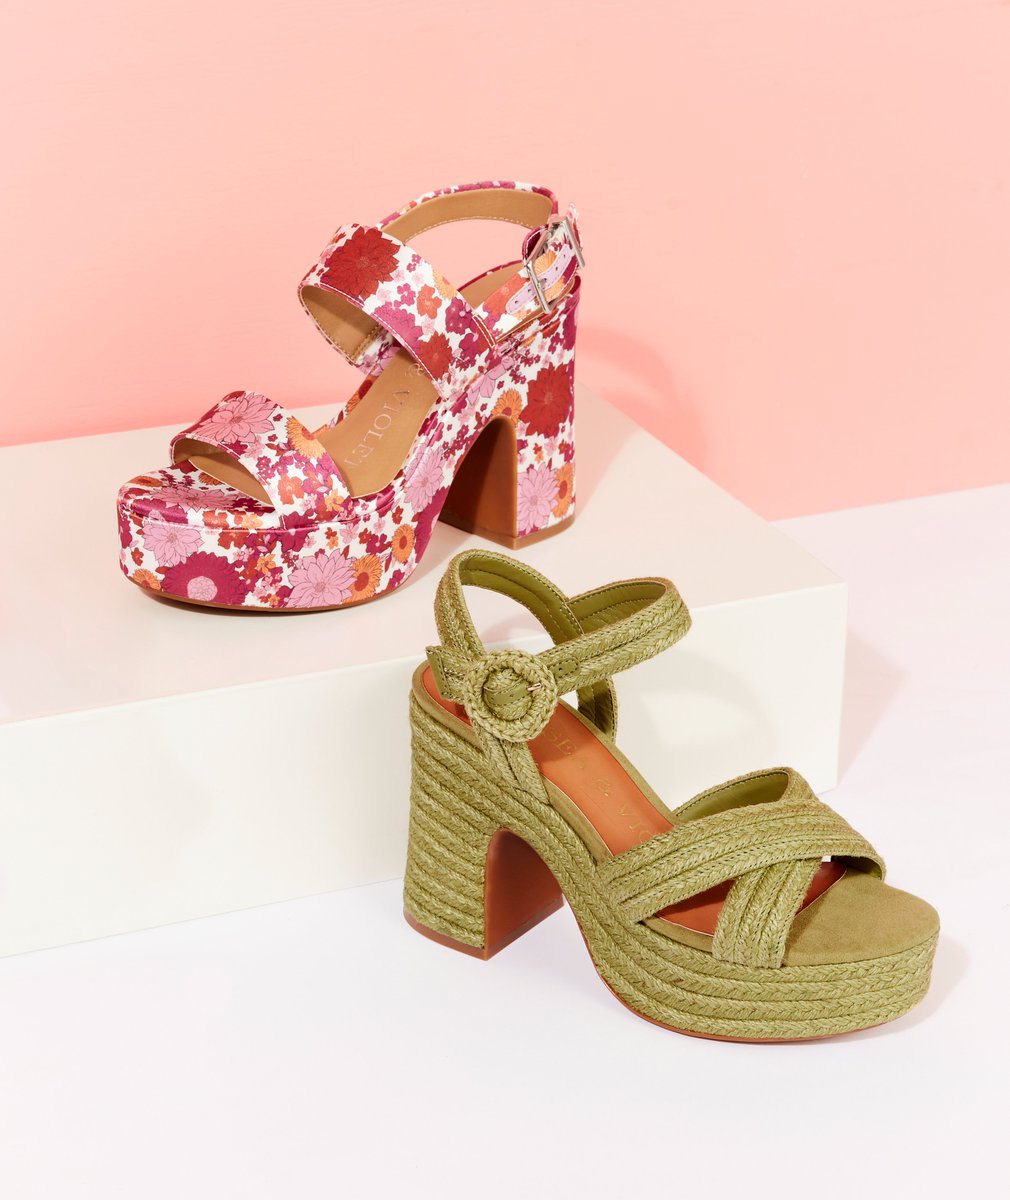 Everyone needs a pair of staple platform sandals from Chelsea & Violet this spring! Shop now: shorturl.at/lAEQR